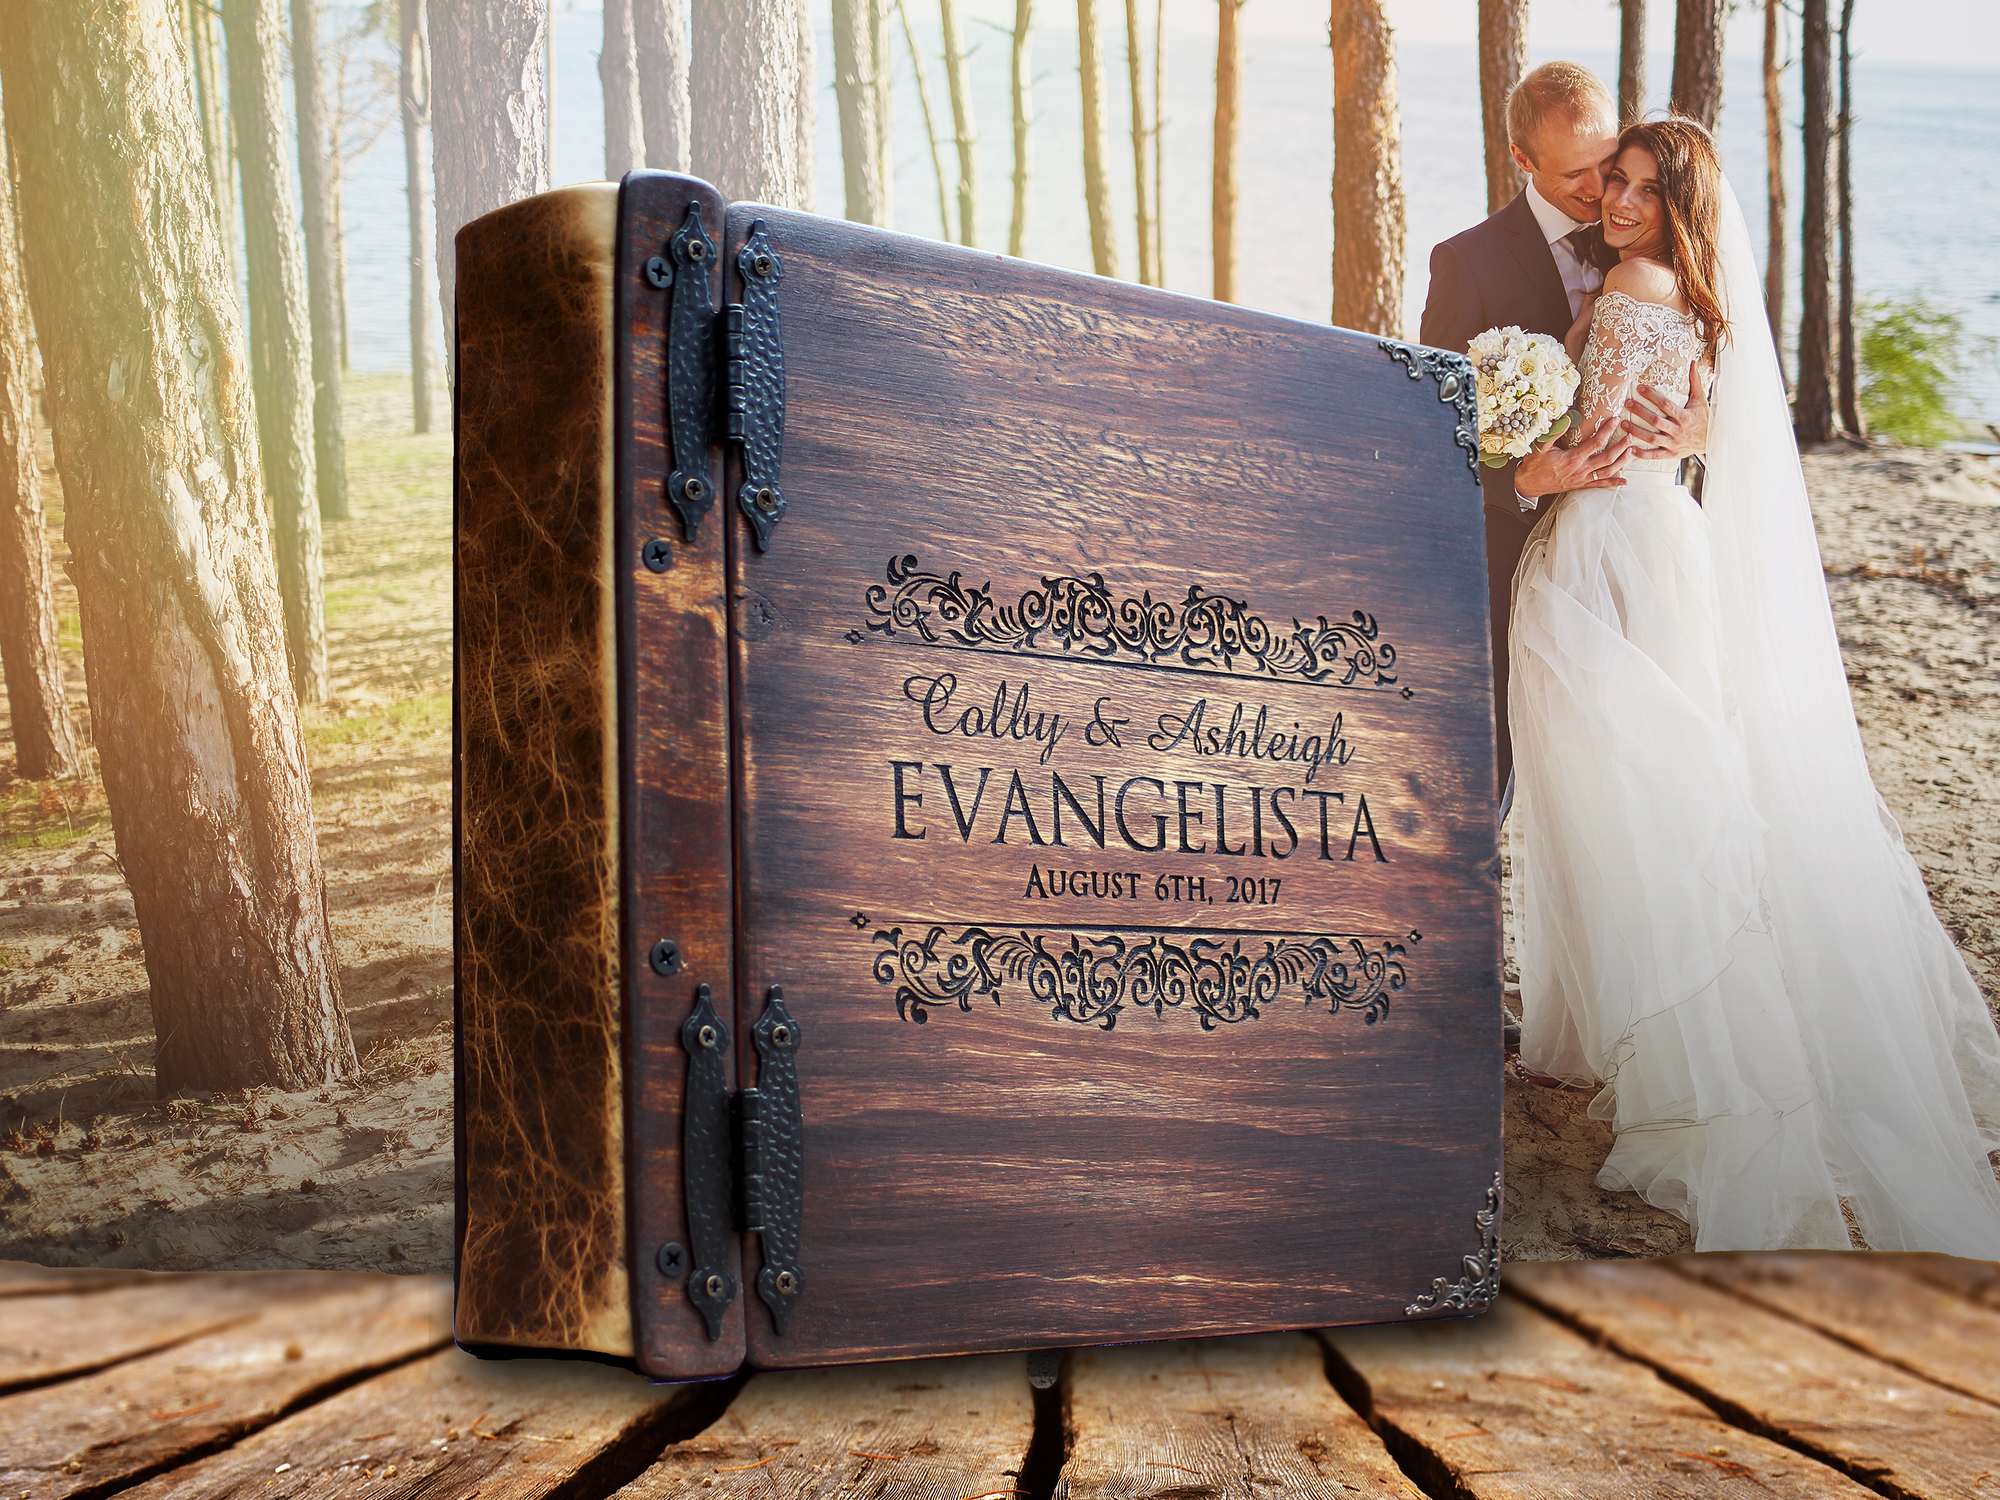 Personalized wooden book with anniversary date and names on cover - one of the top 5 fifth anniversary gifts